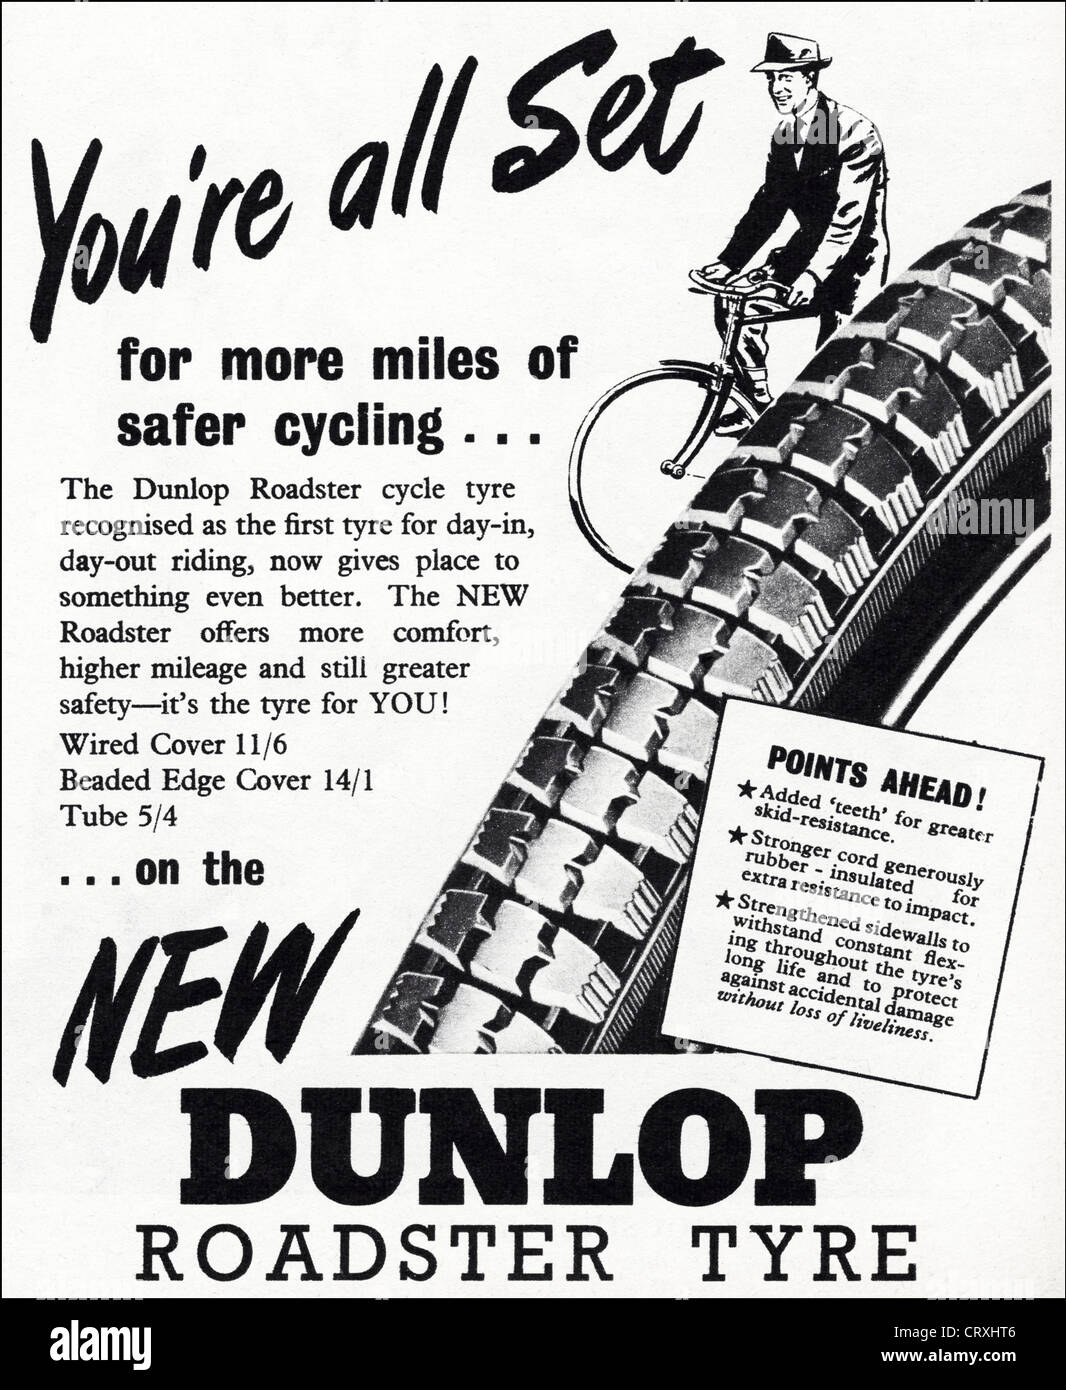 DUNLOP ROADSTER cycle tyre advert. Original 1950s vintage print advertisement from topical English magazine advertising Stock Photo